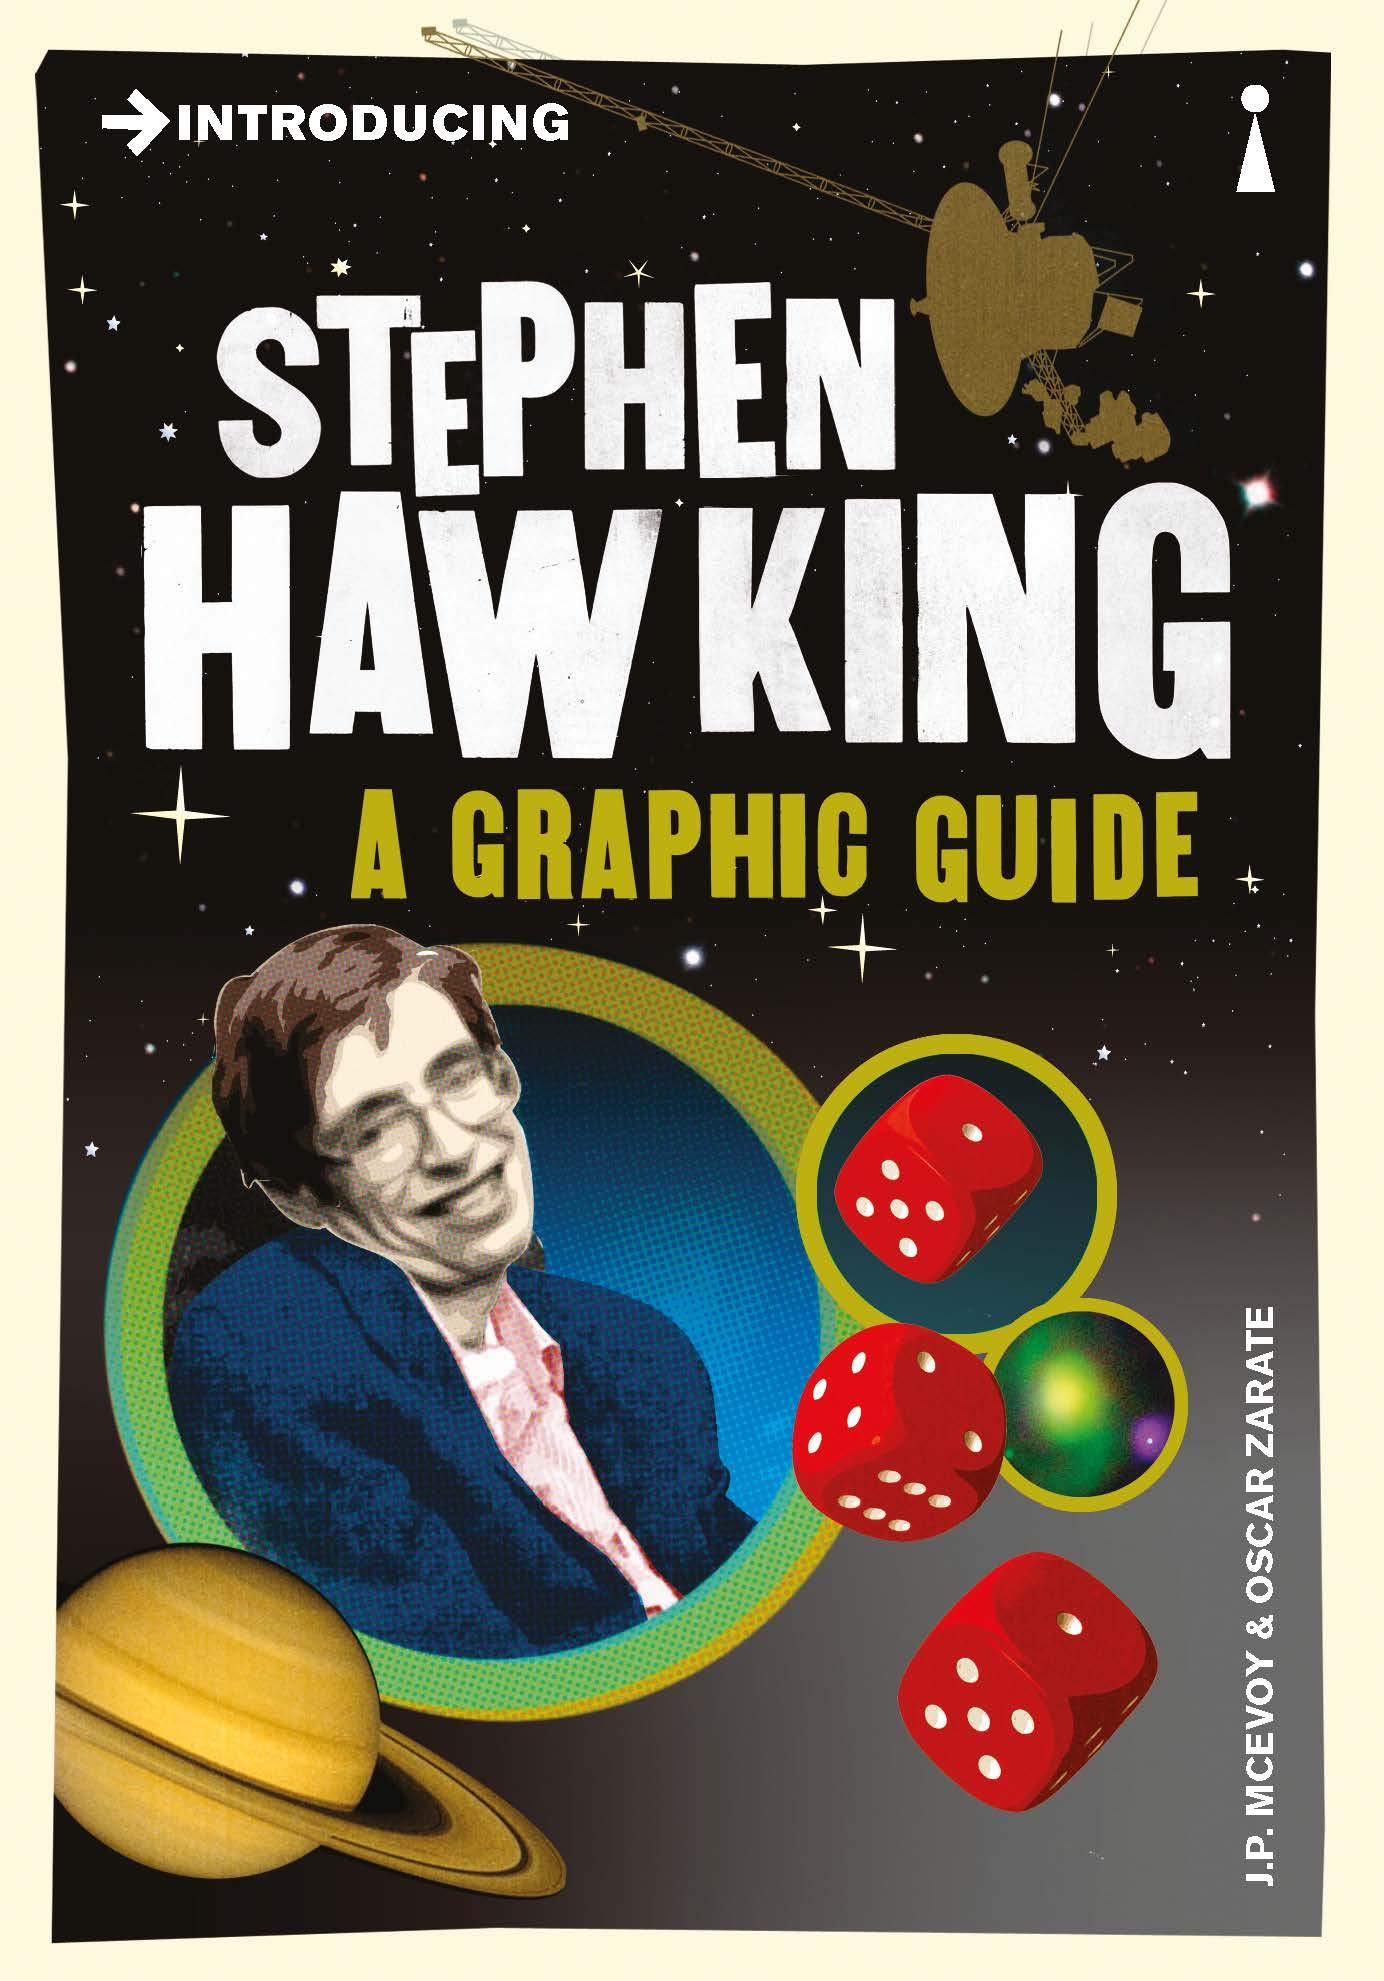 McEvoy J.P., Zarate O. - Introducing Stephen Hawking: A Graphic Guide